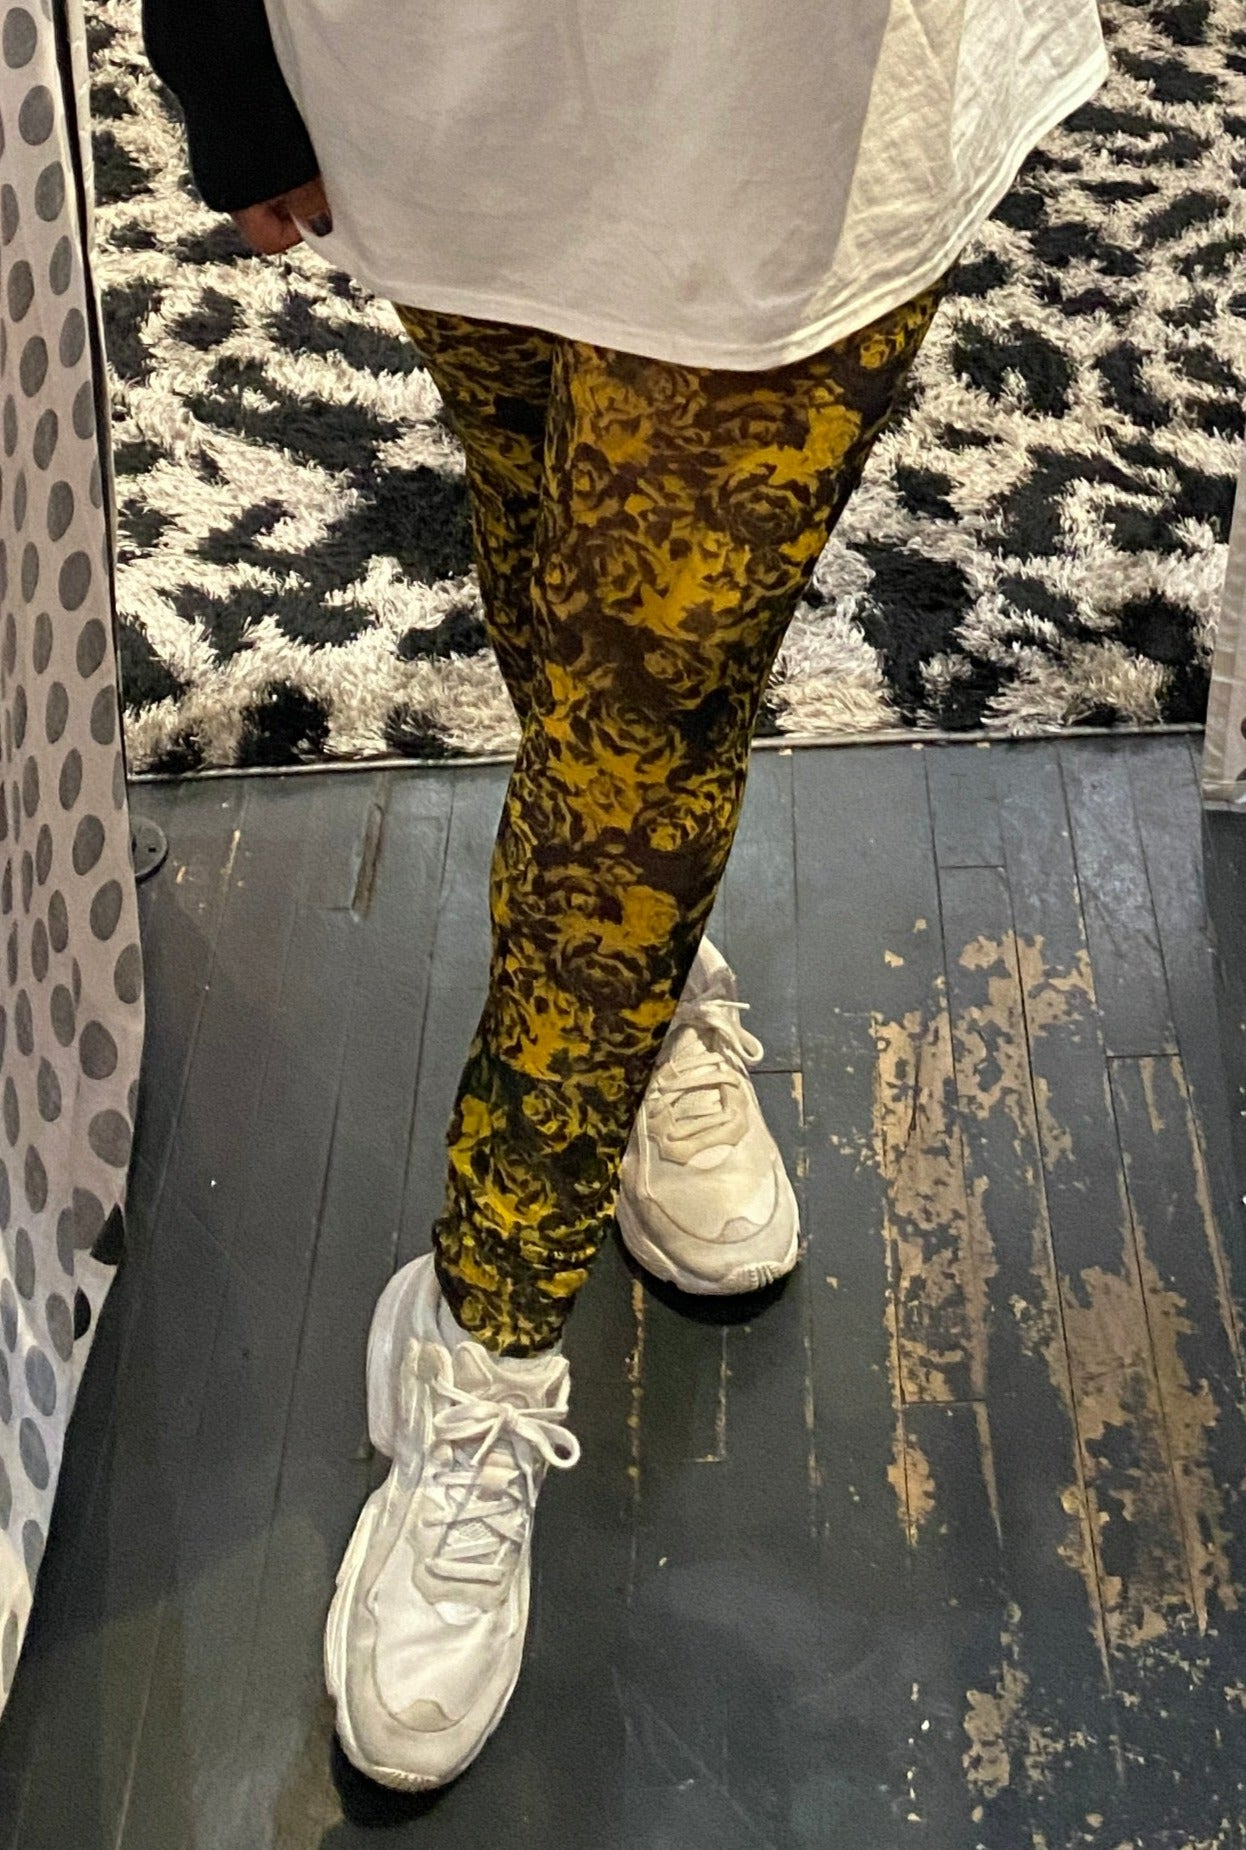 GANNI Black and Yellow Floral Mesh Leggings, Size 16/18 and 22/24